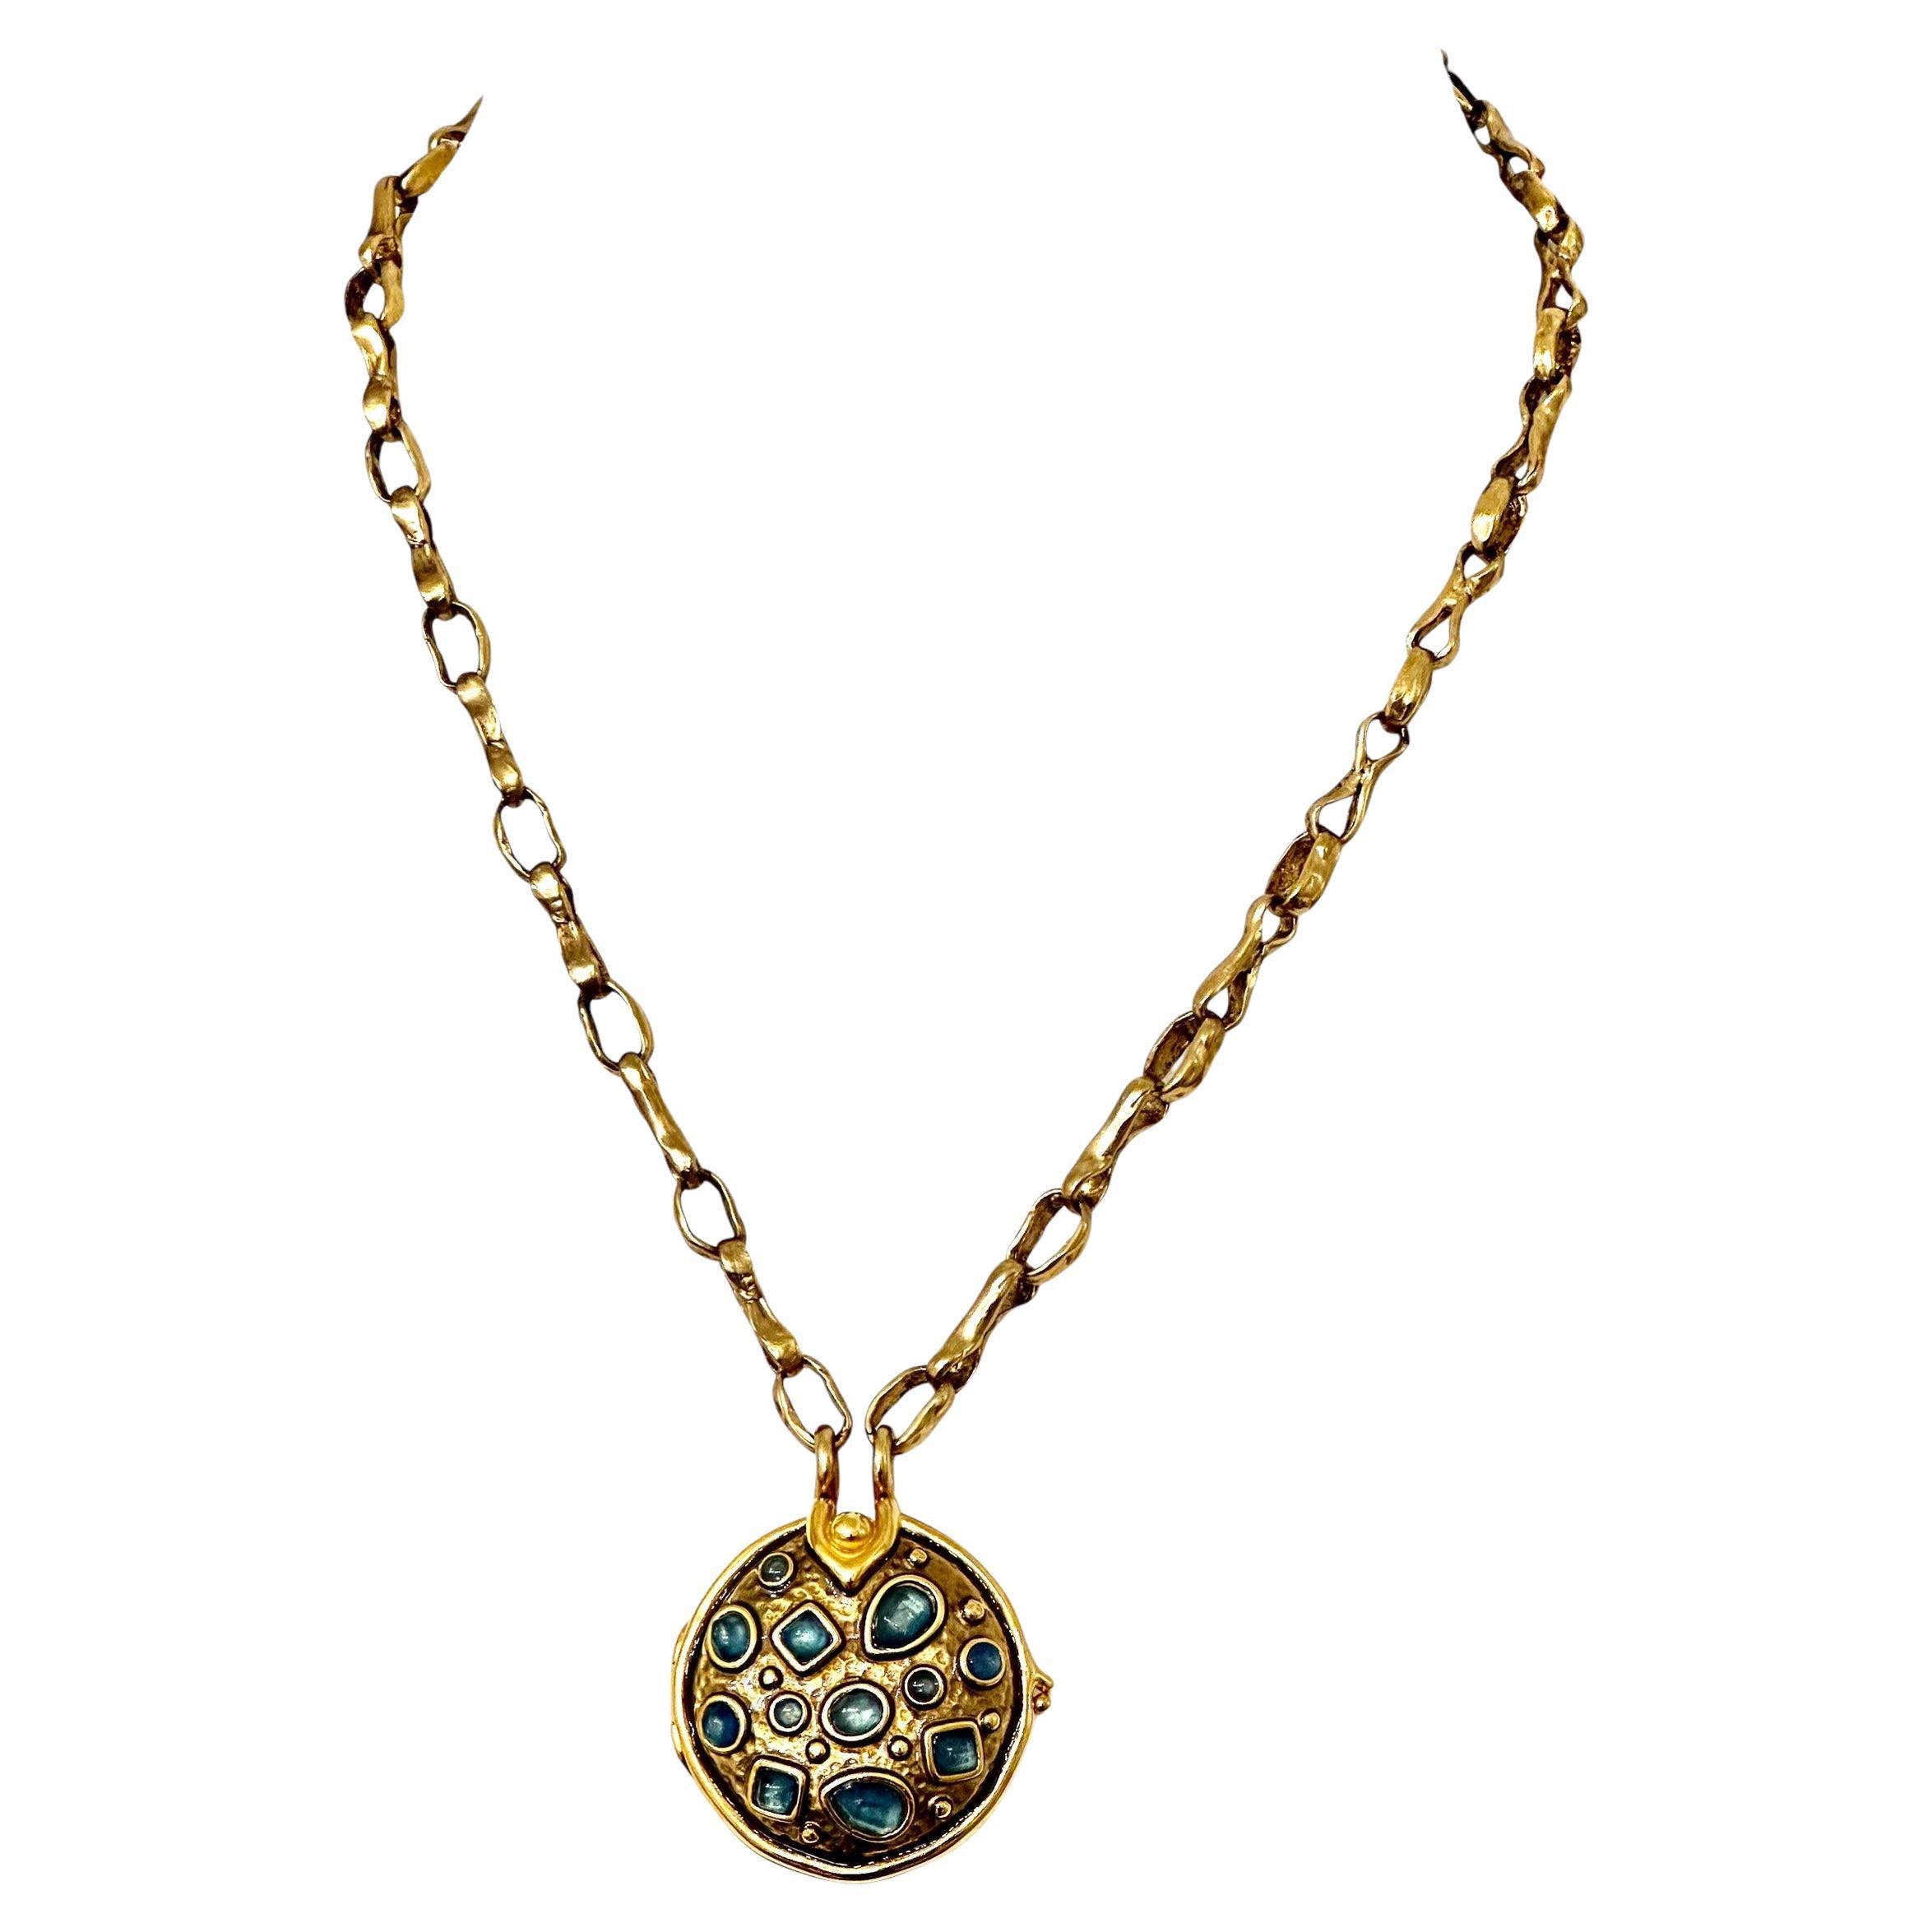 New at the House of Goossens. Necklace with medallion and secret box, mounted on a sautoir chain. Yellow gold finish. The Boucle Cocktail Collection reveals a jewel in relief punctuated with rock crystal beads on a patinated enamel. Colour Bicolor